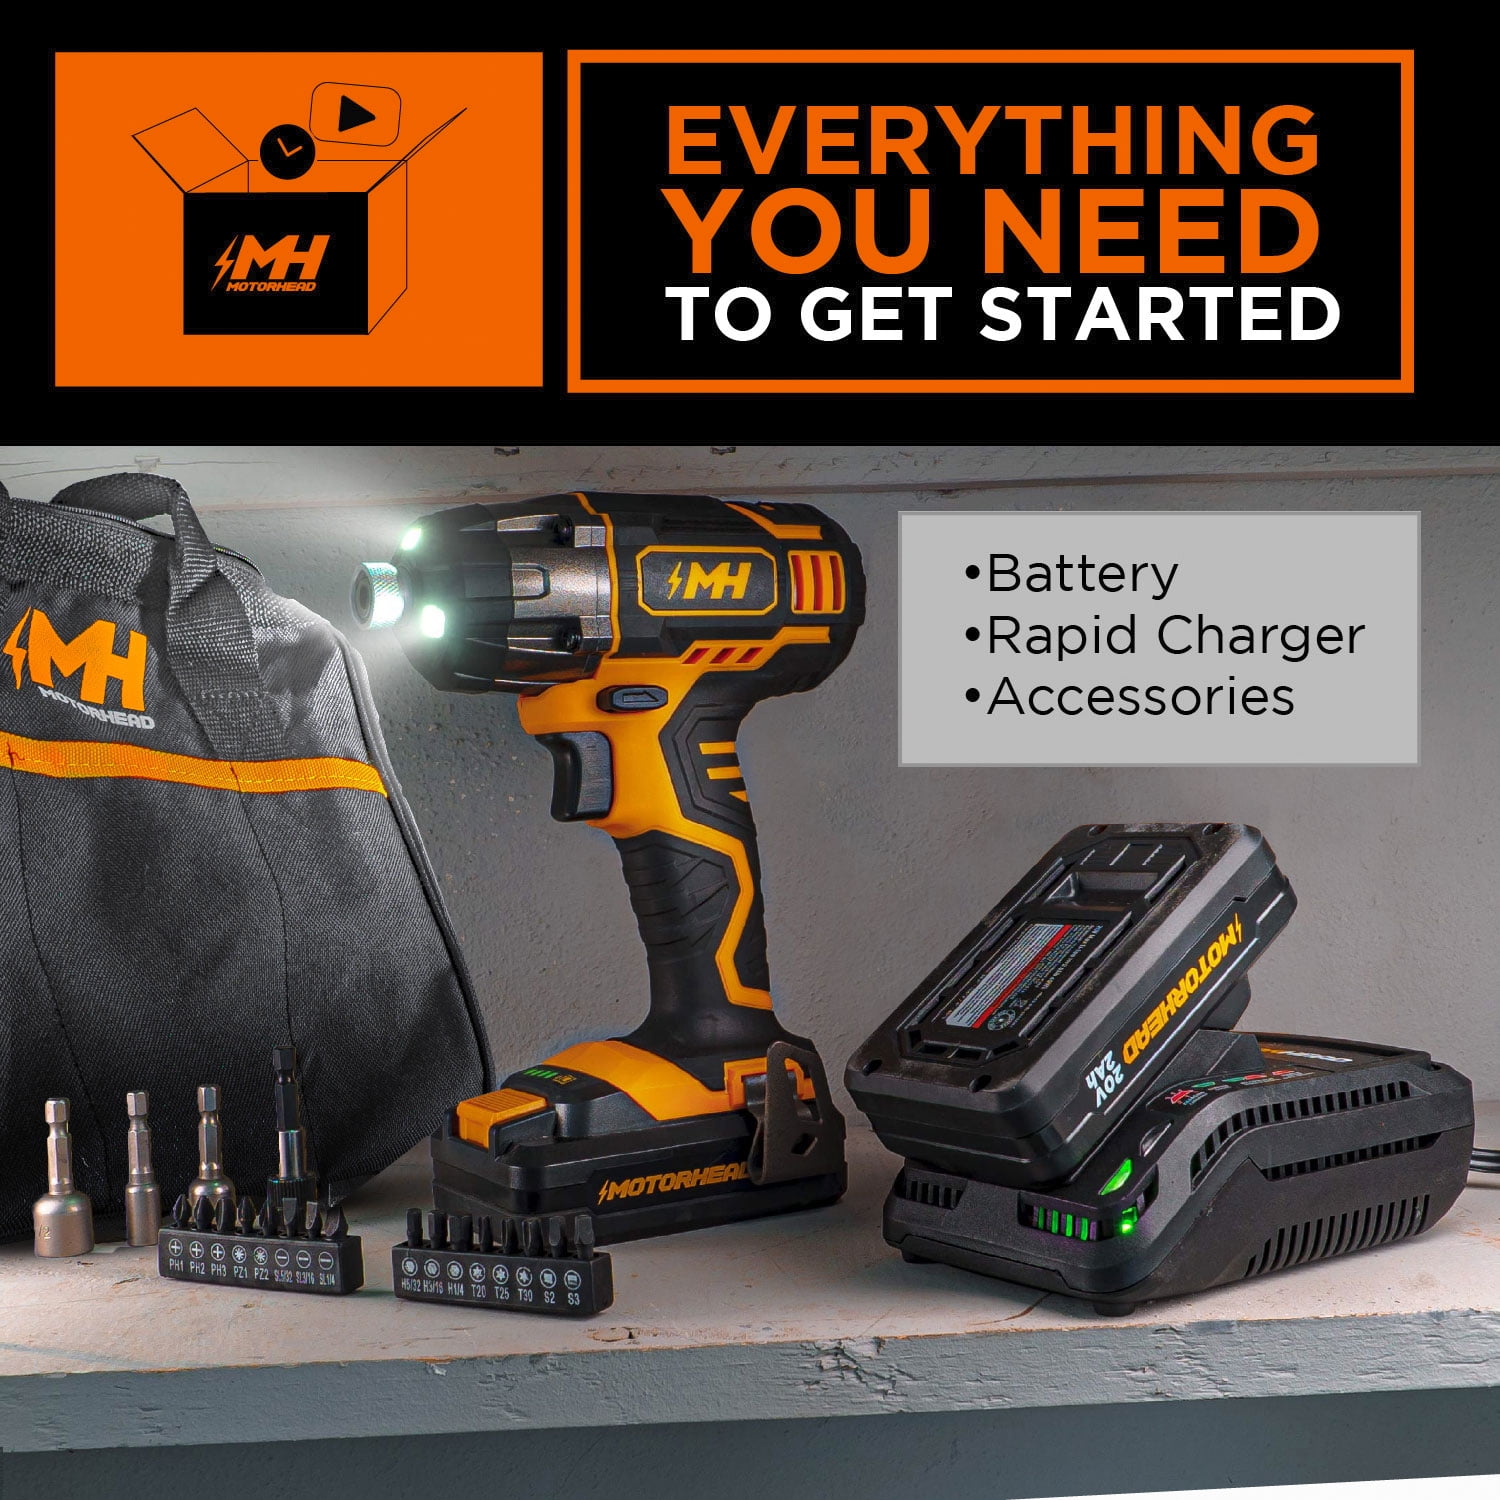 MOTORHEAD 20V ULTRA Cordless Impact Driver Kit, Lithium-Ion, ¼” All-Metal  Hex Chuck, Tri-Beam LED, Variable Speed Trigger, 2Ah Battery & Quick 